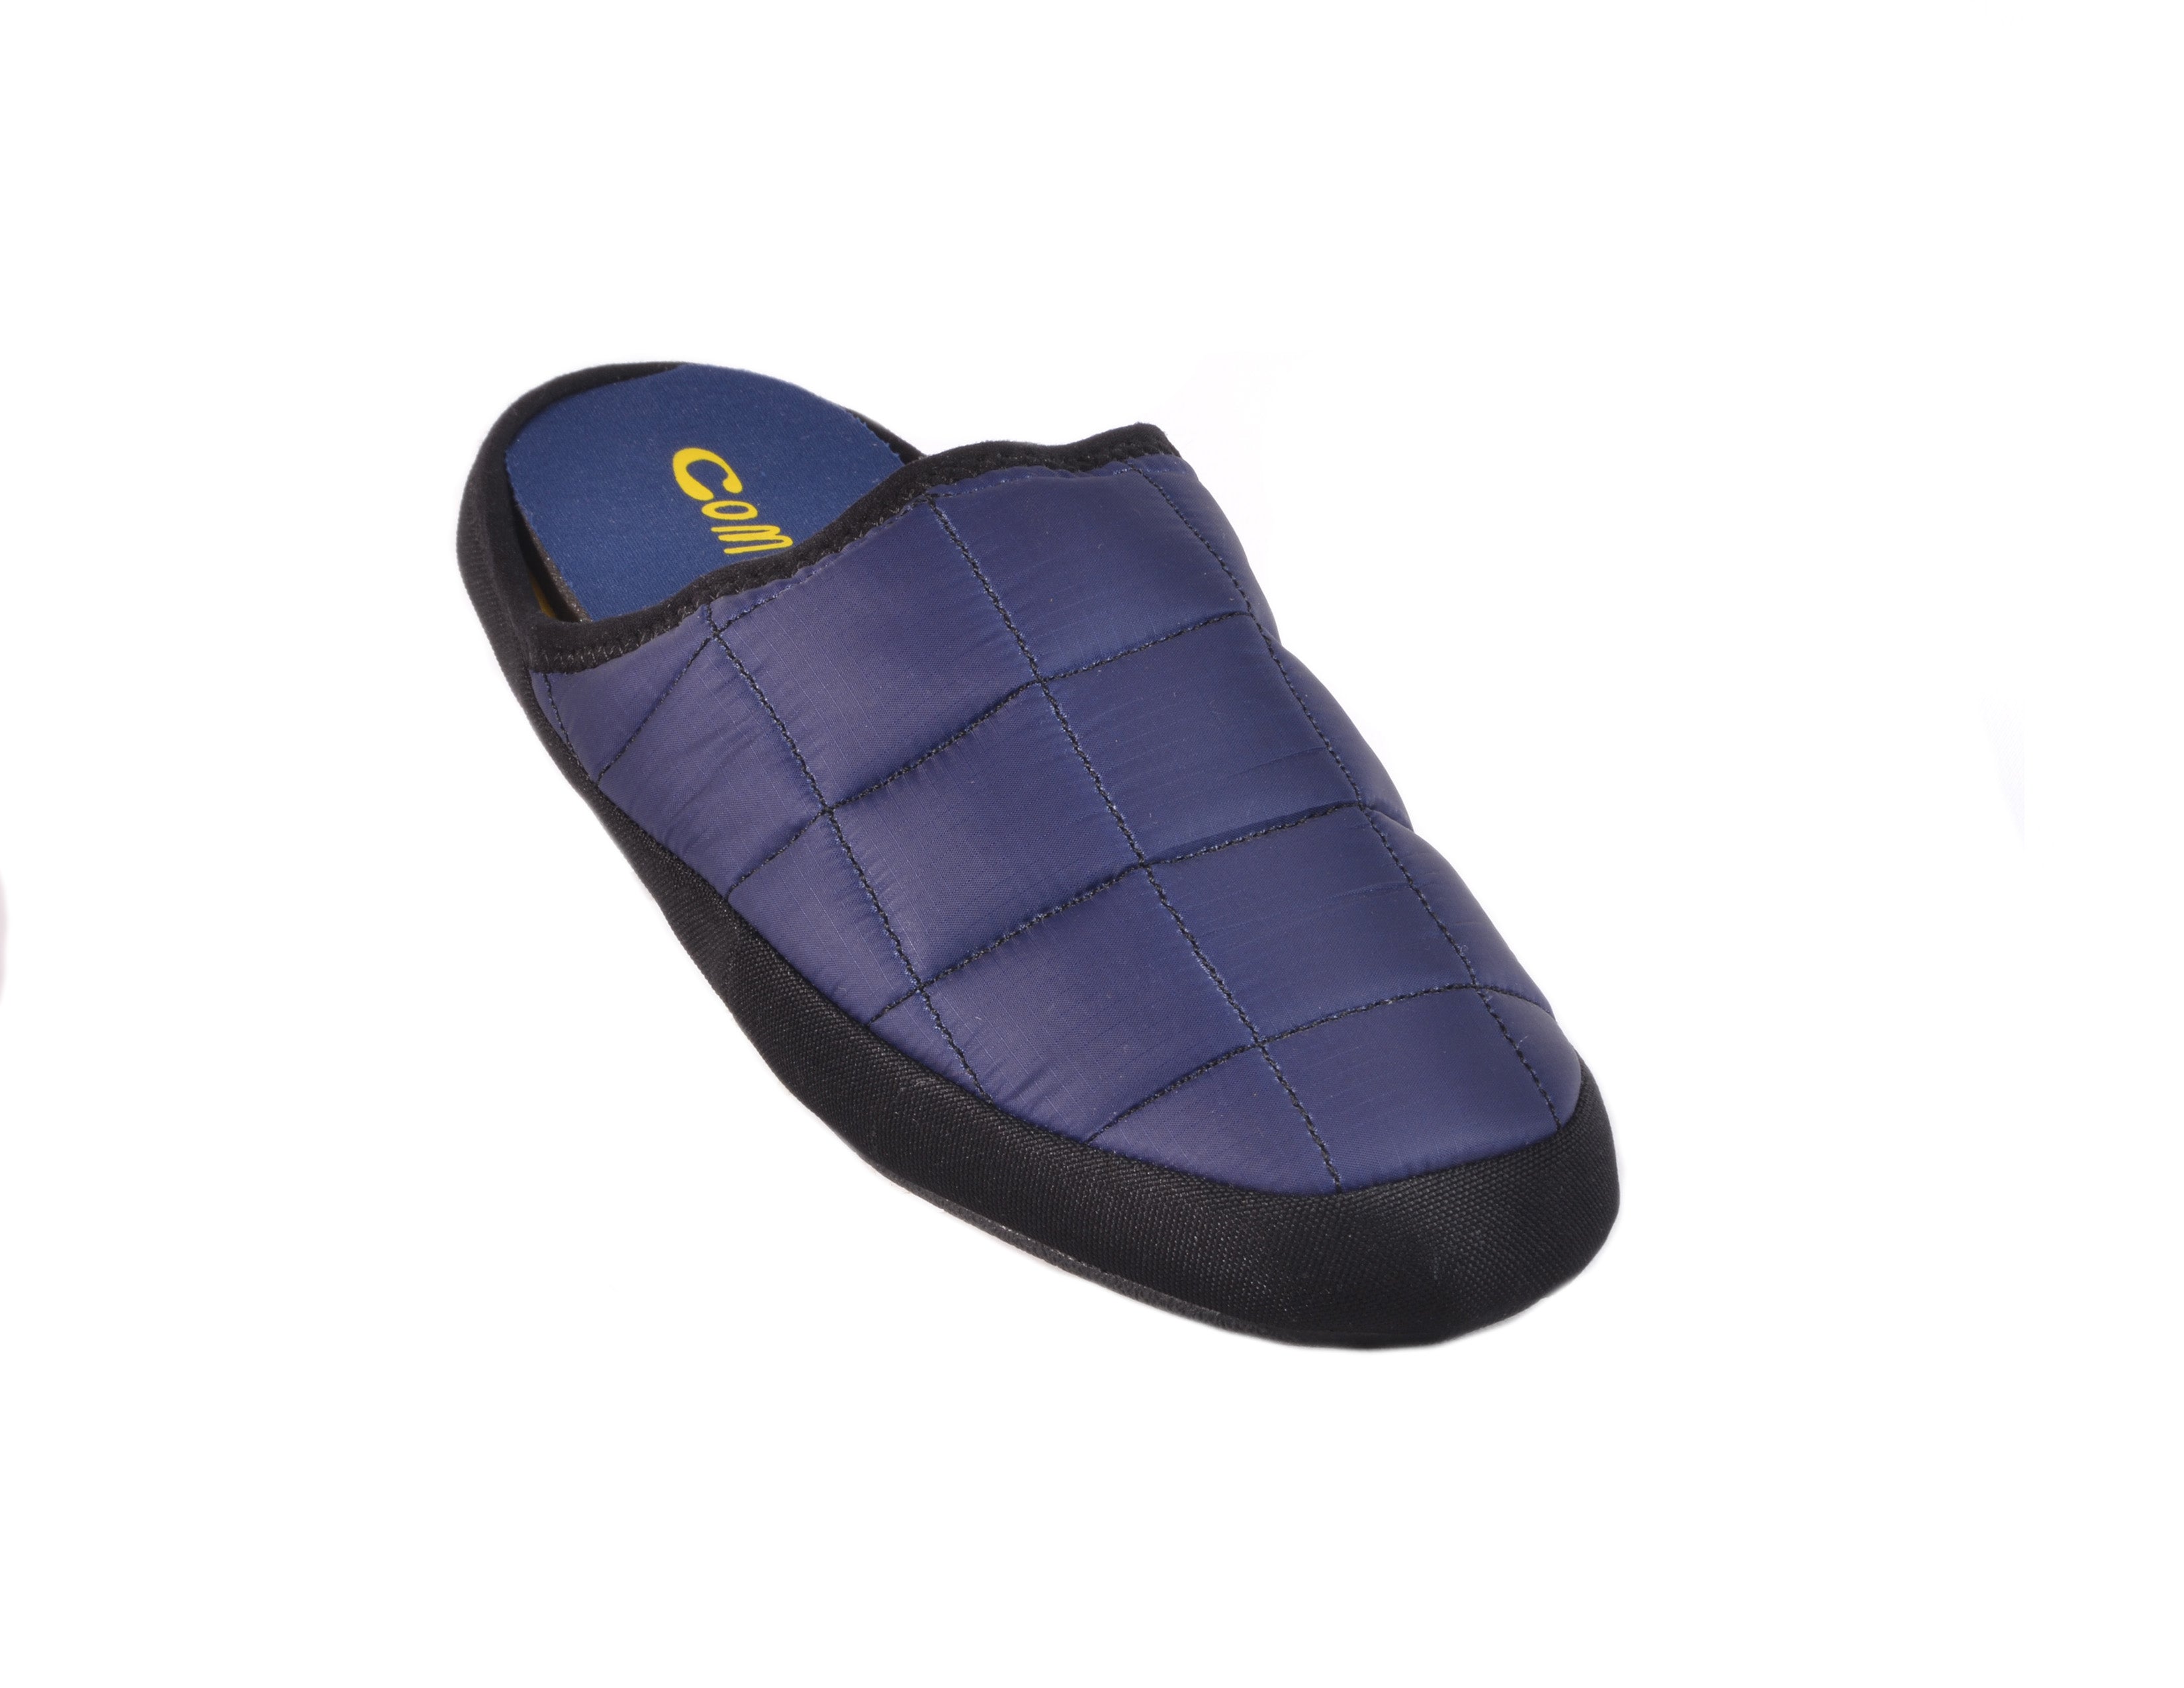 MENS TOKYOES NAVY YELLOW